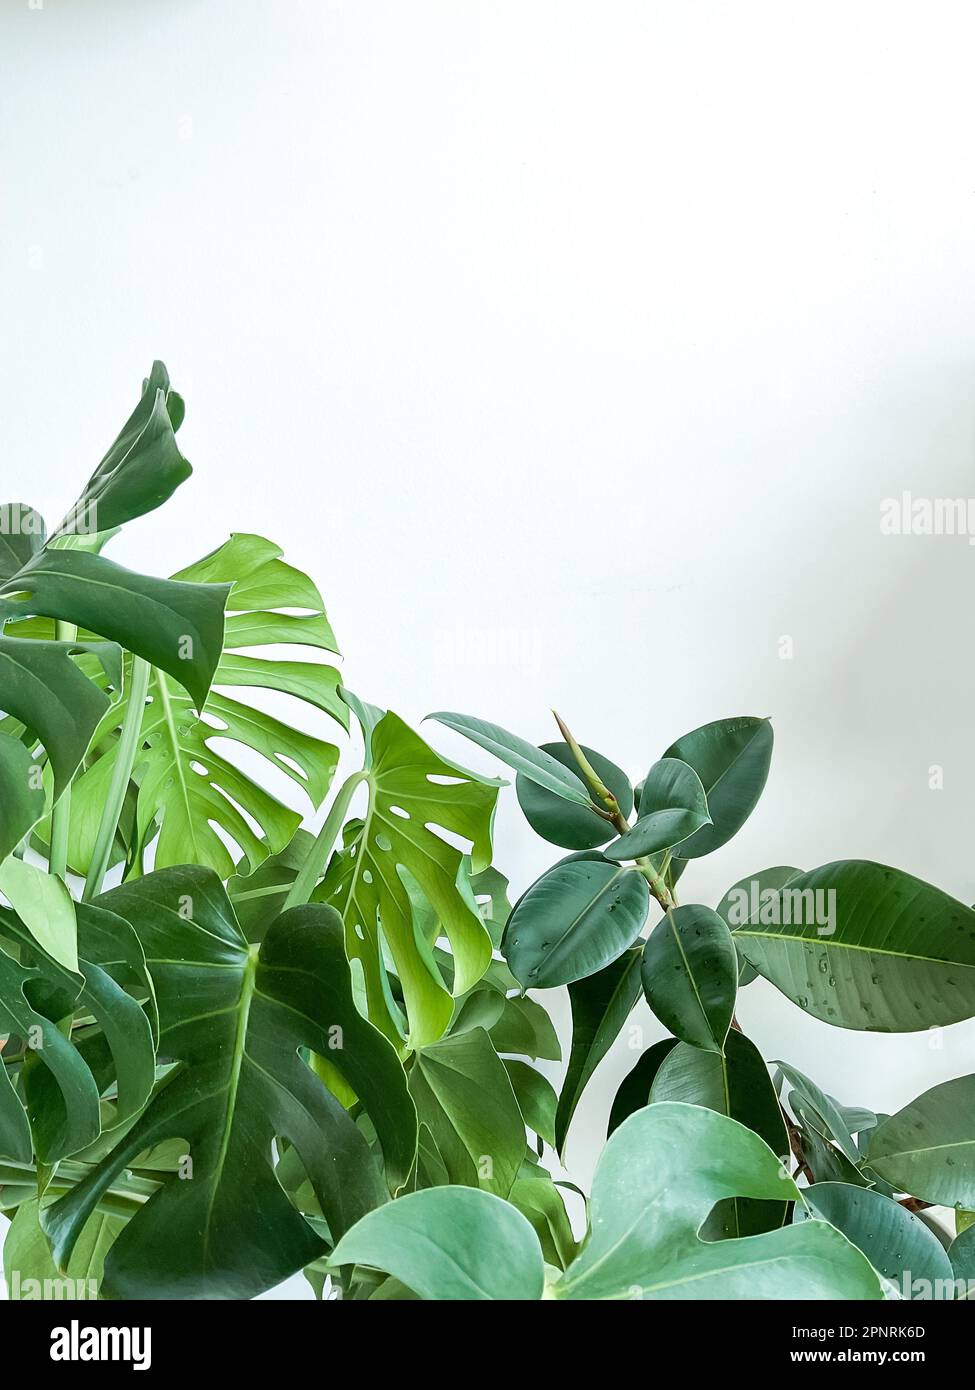 Monstera deliciosa plant and ficus on white background. Stylish and minimalistic Stock Photo